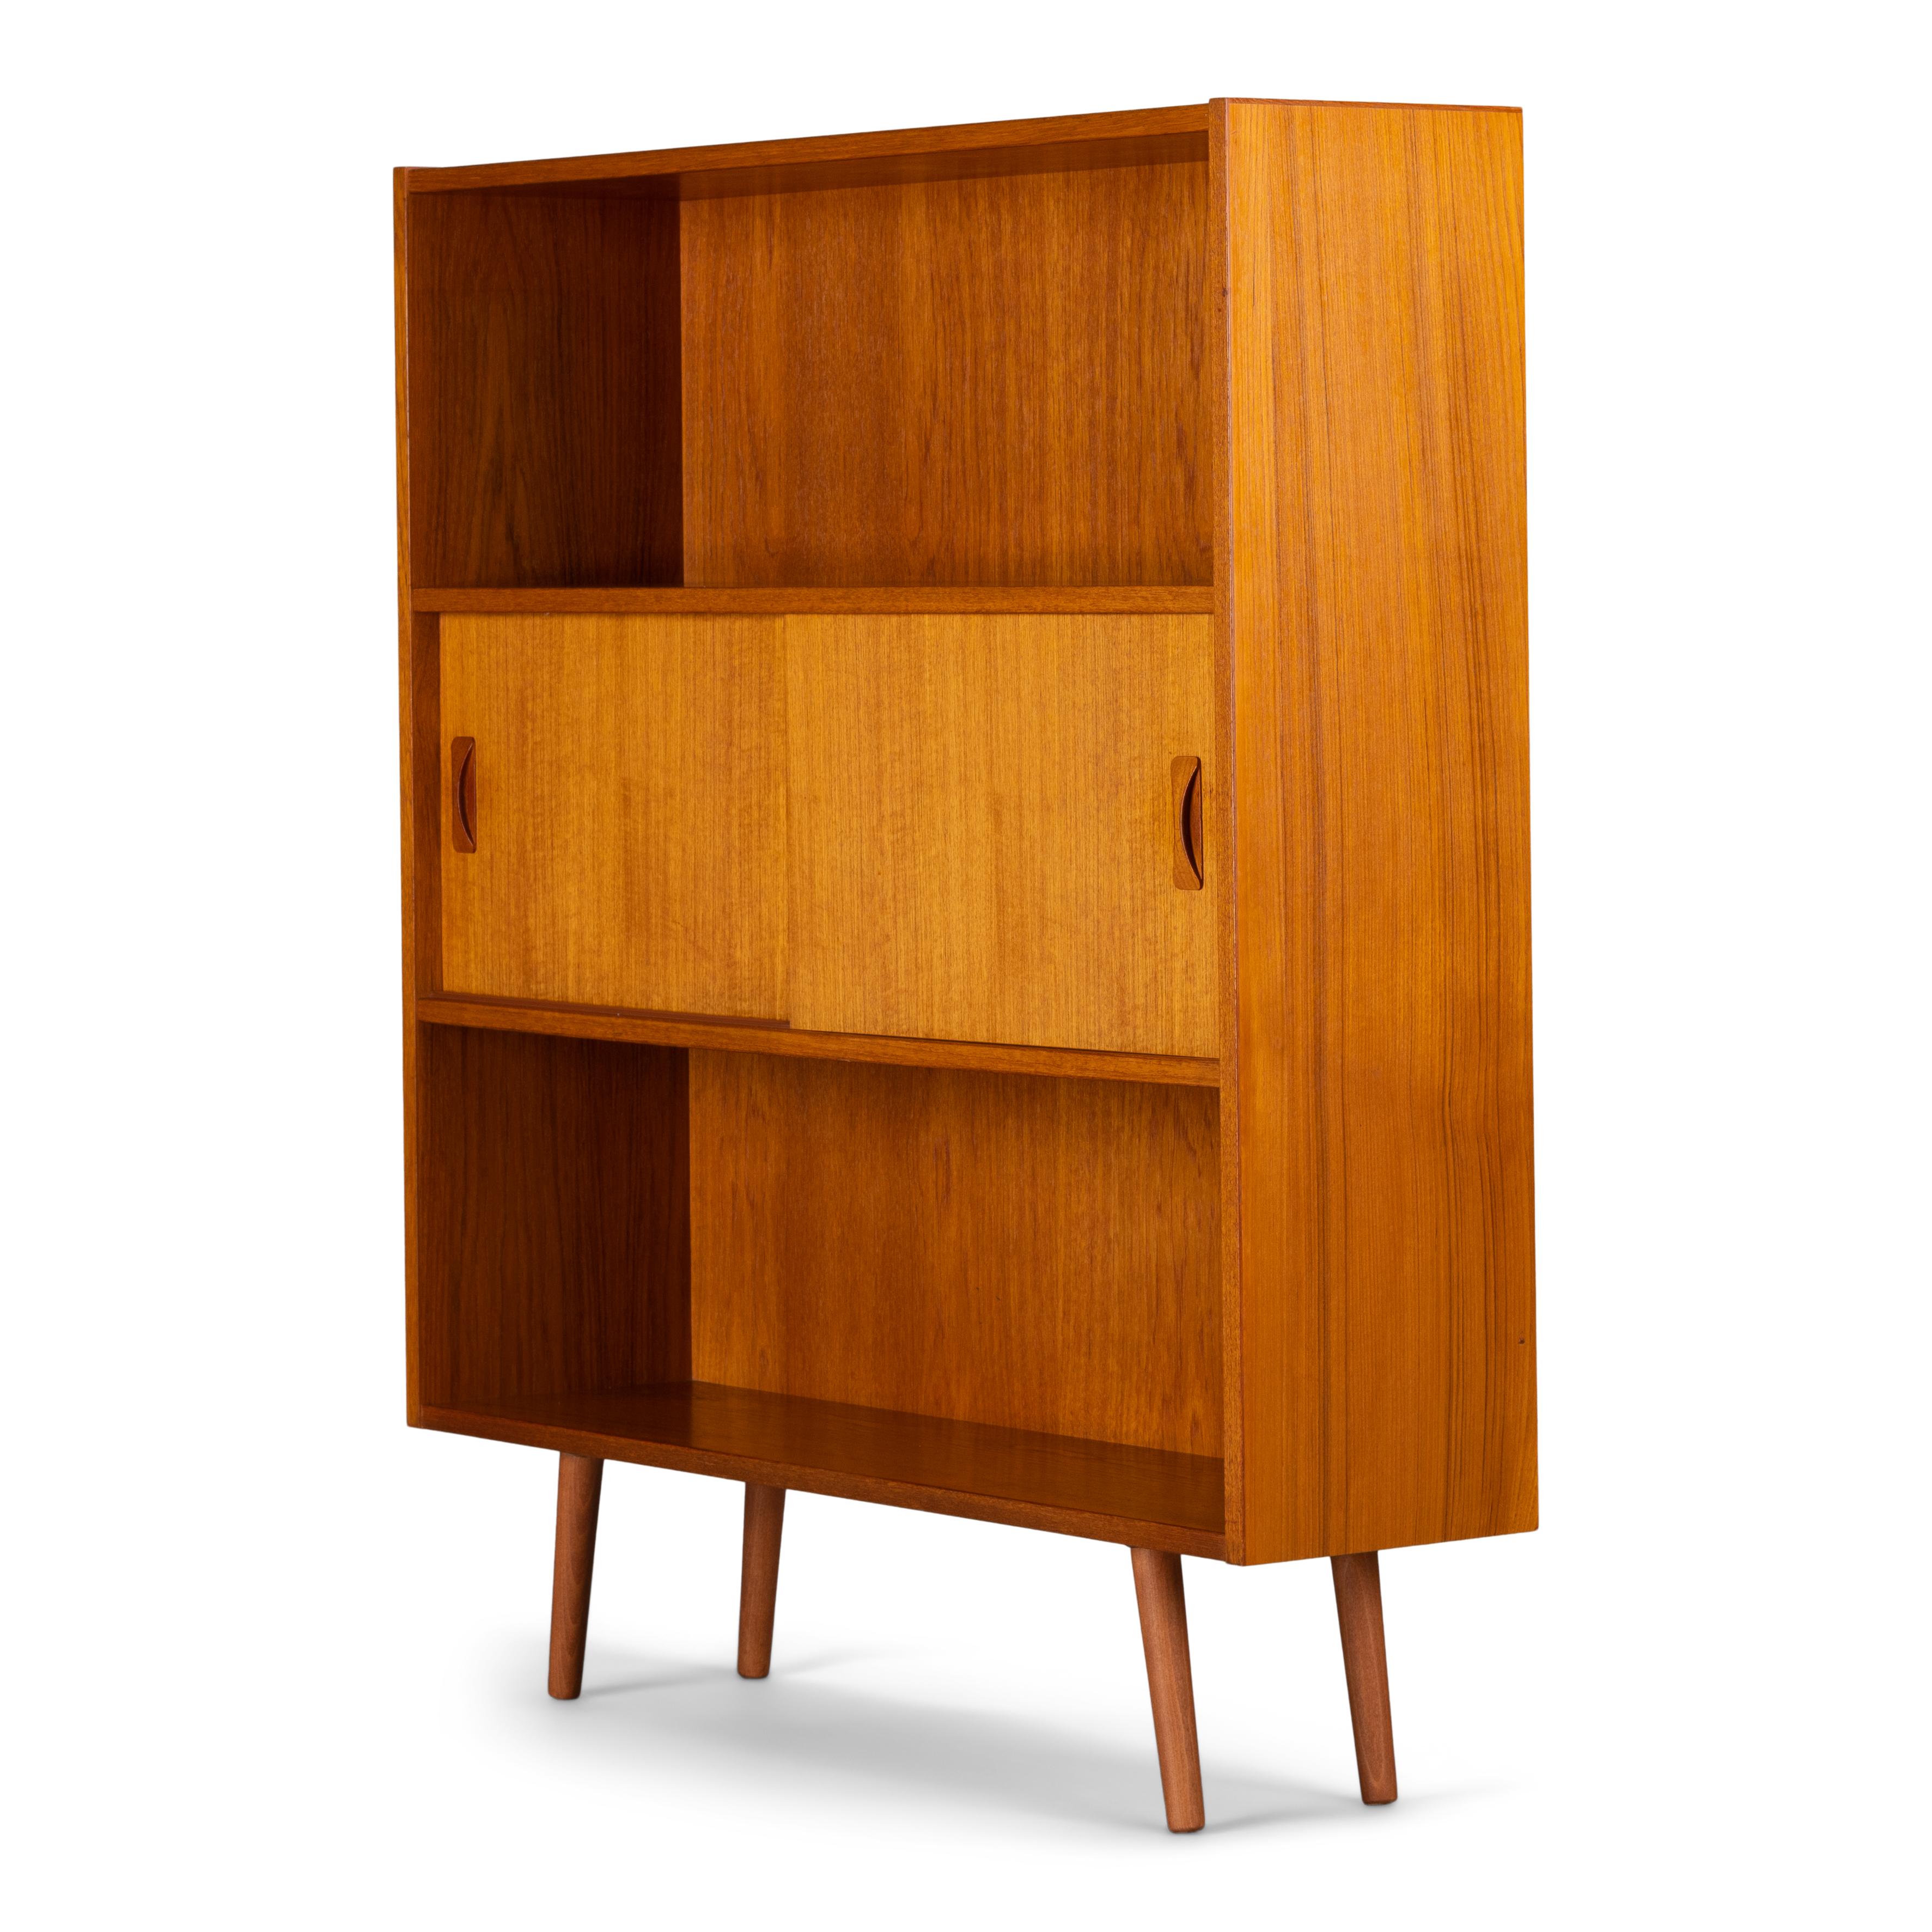 Danish midcentury small bookcase in beautiful teak veneer by Clausen & Søn. This chest from the mid-1970s comes with 2 book shelves and a section with two sliding doors in the middle of the book case. This book case is still original and in a very